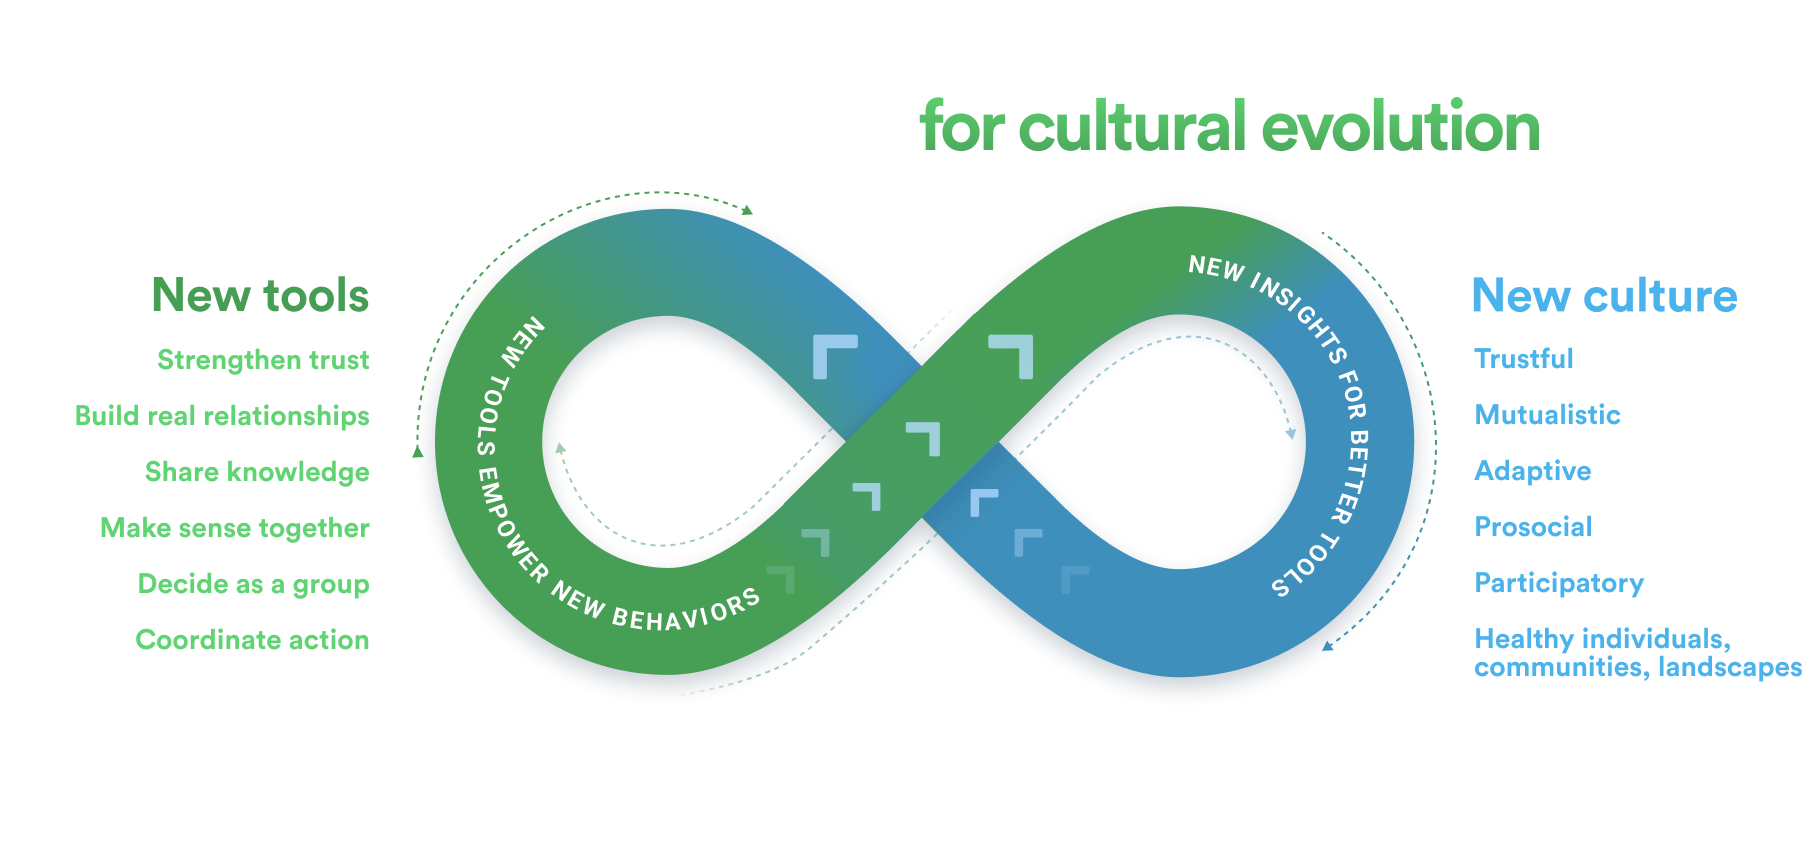 Culture and tools evolve together.